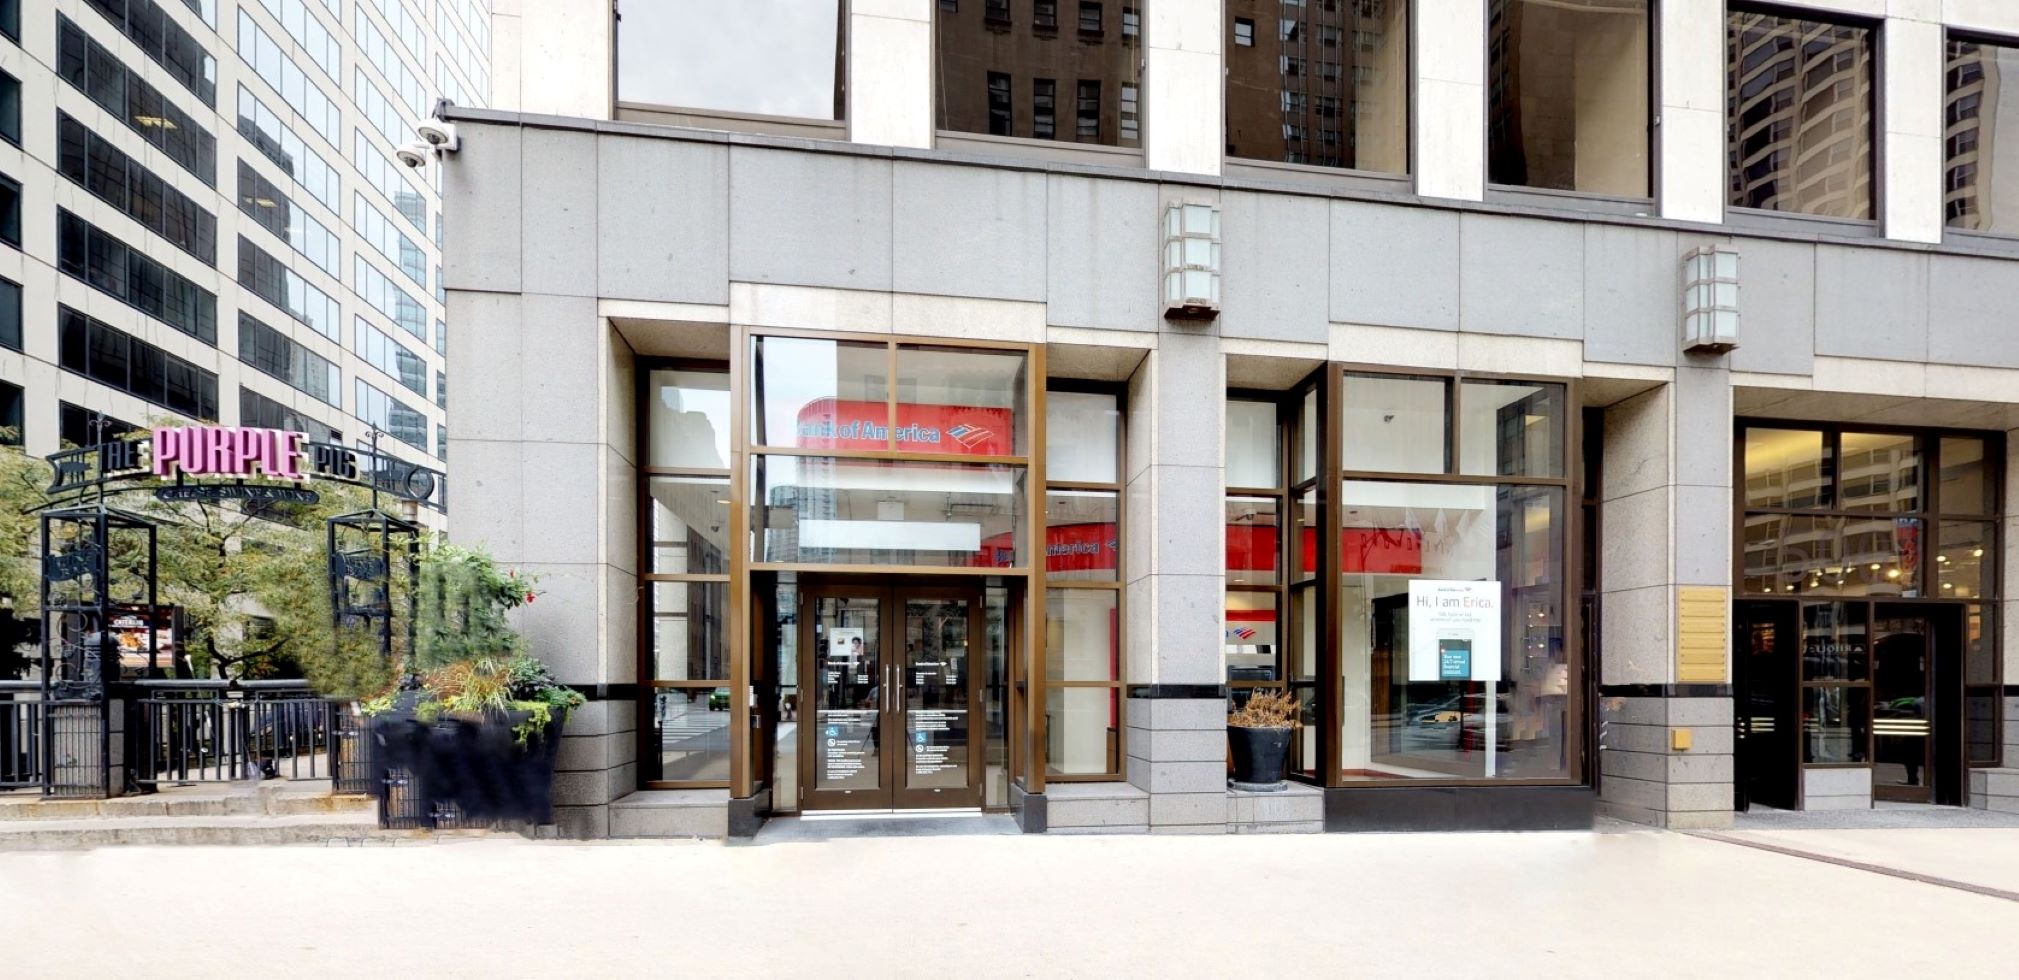 Bank of America financial center with walk-up ATM | 500 N Michigan Ave, Chicago, IL 60611